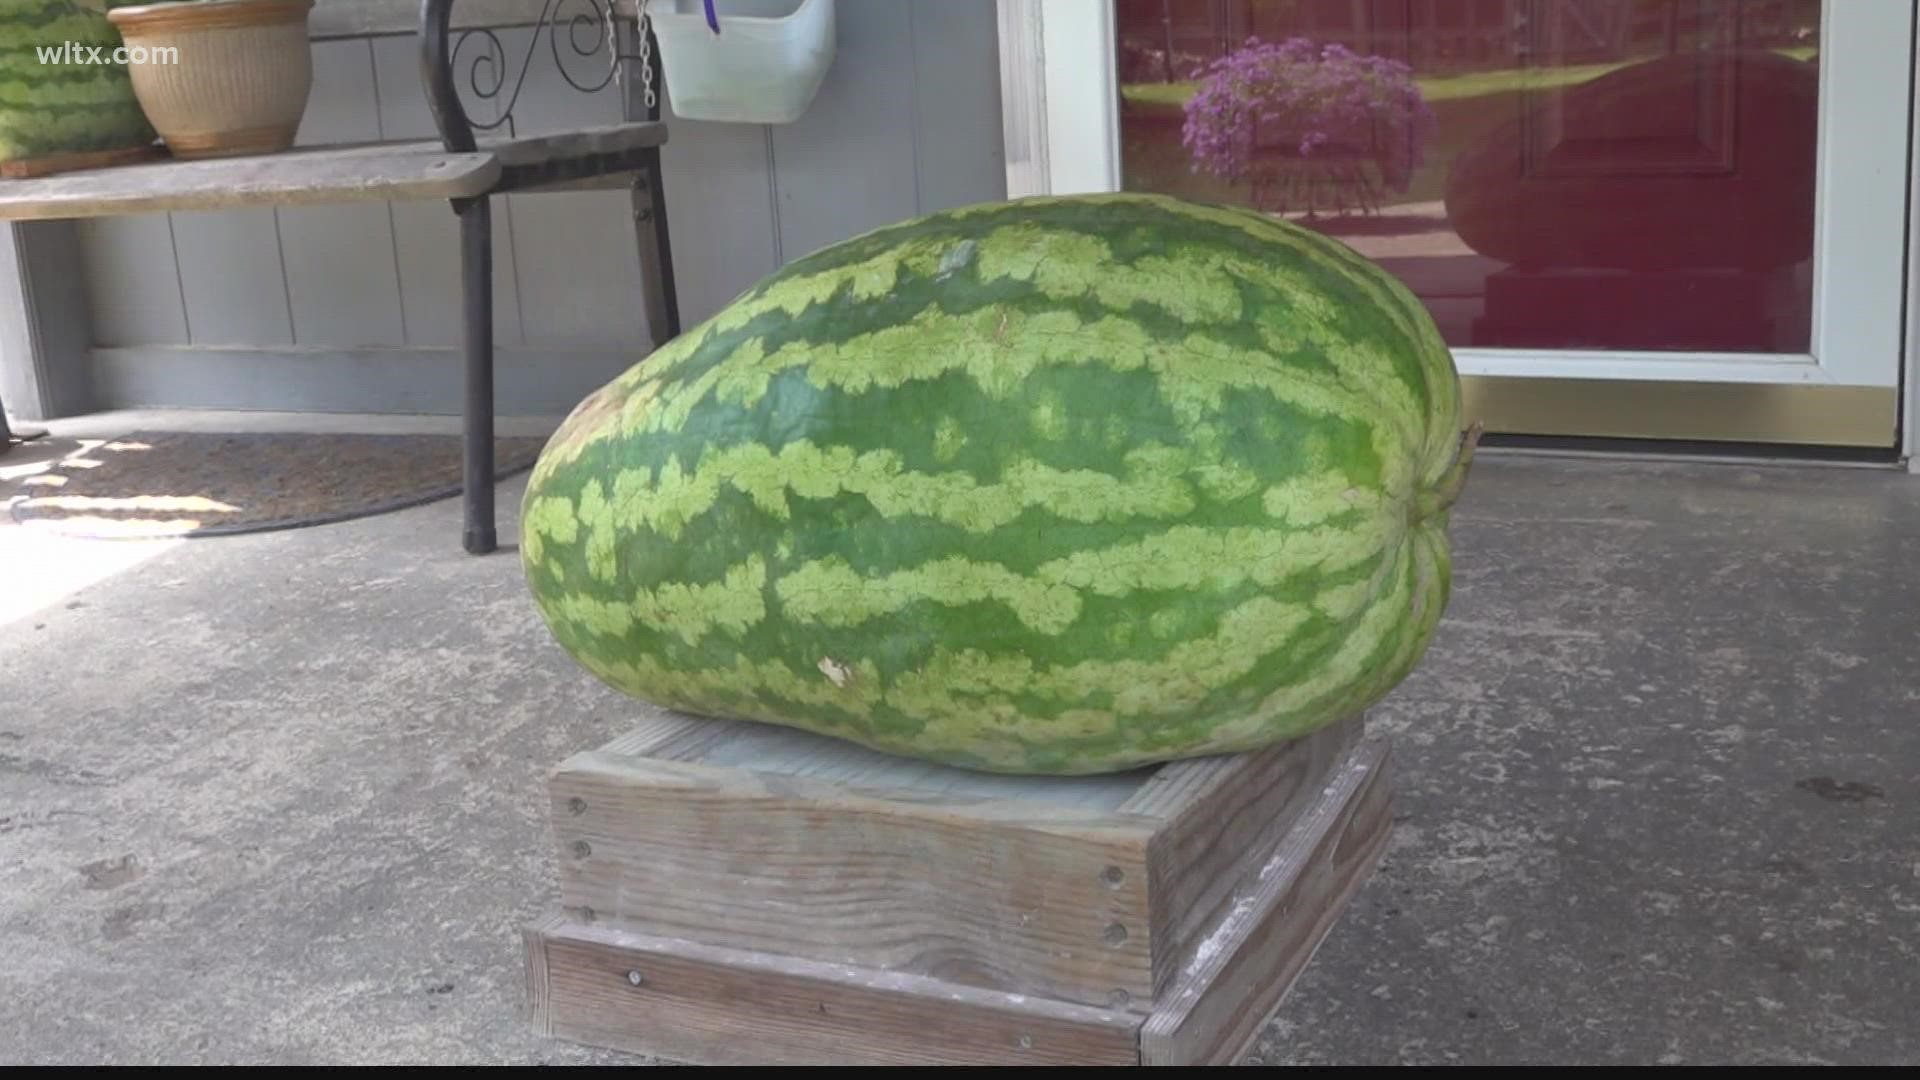 Sumter woman grows 80 lbs watermelon in her yard and calls it her 'big baby'.